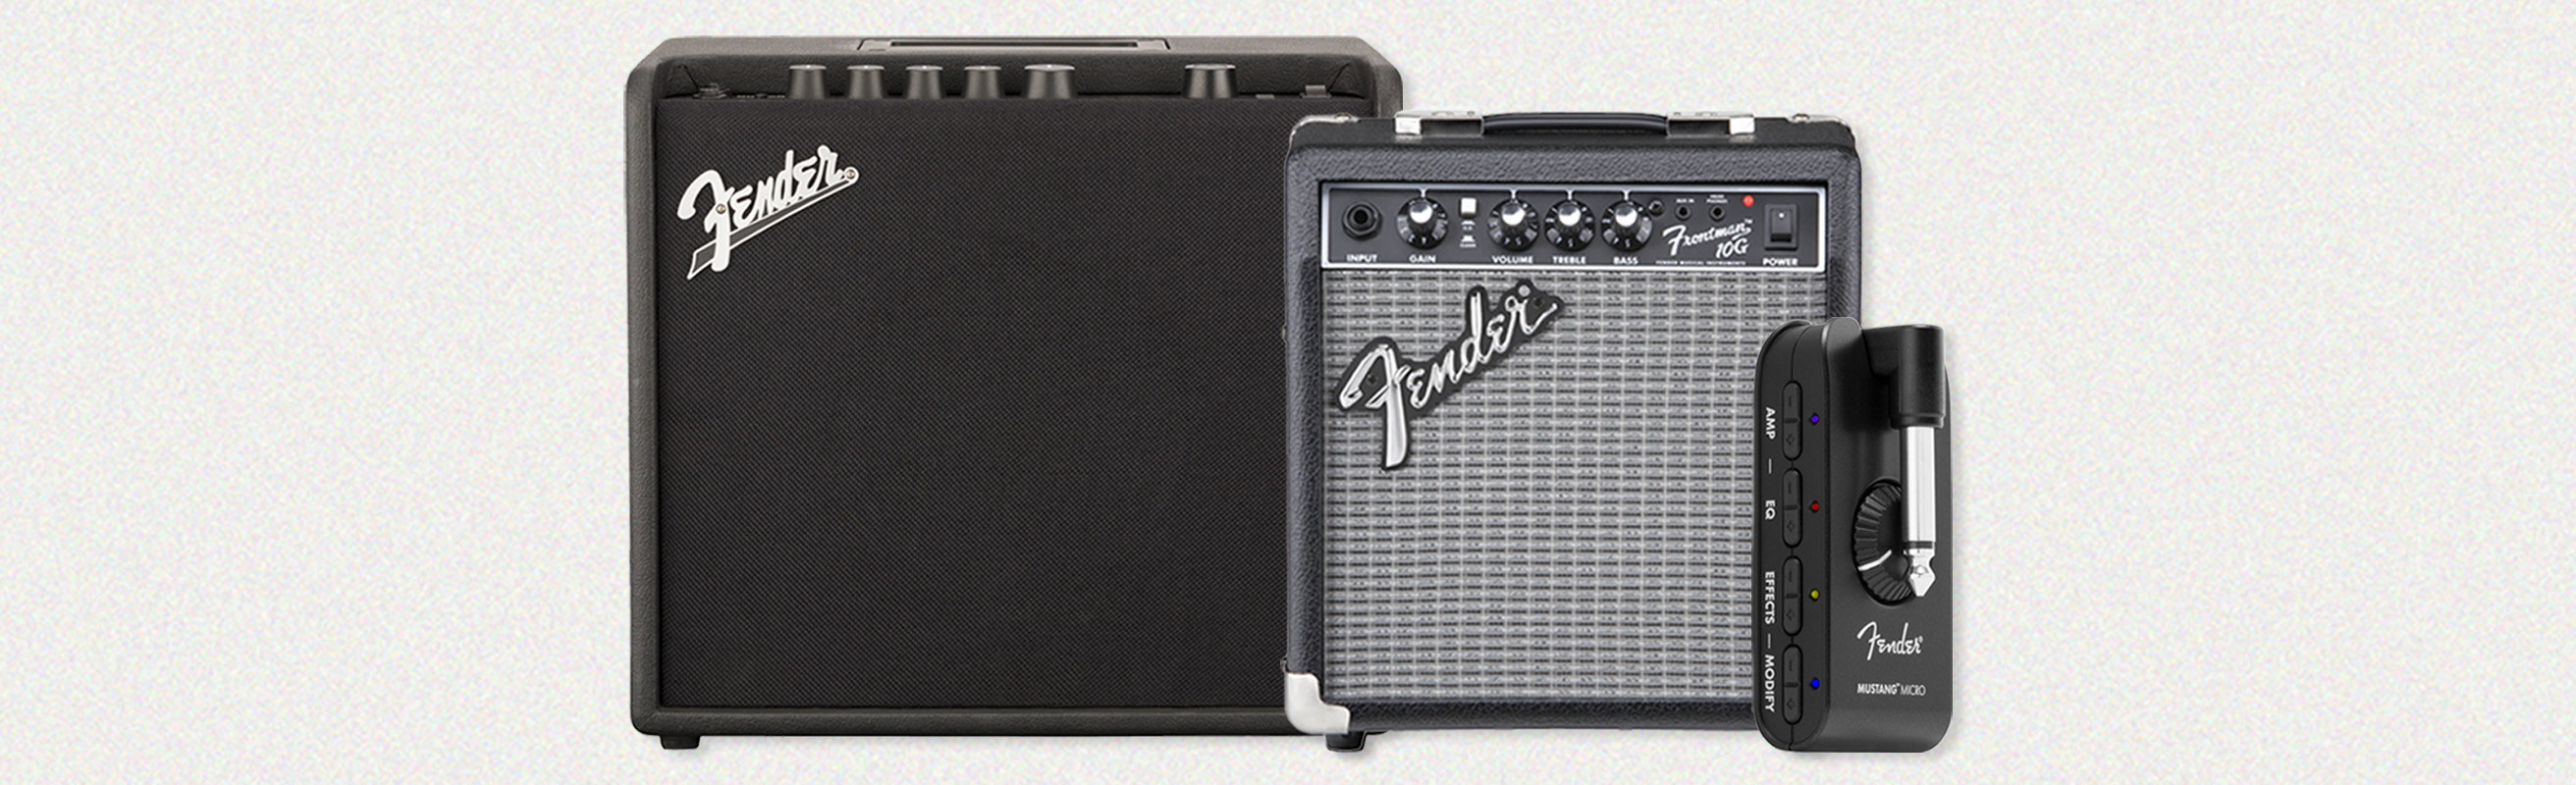 Fender Mustang Micro headphone amp  First Impressions & Review 